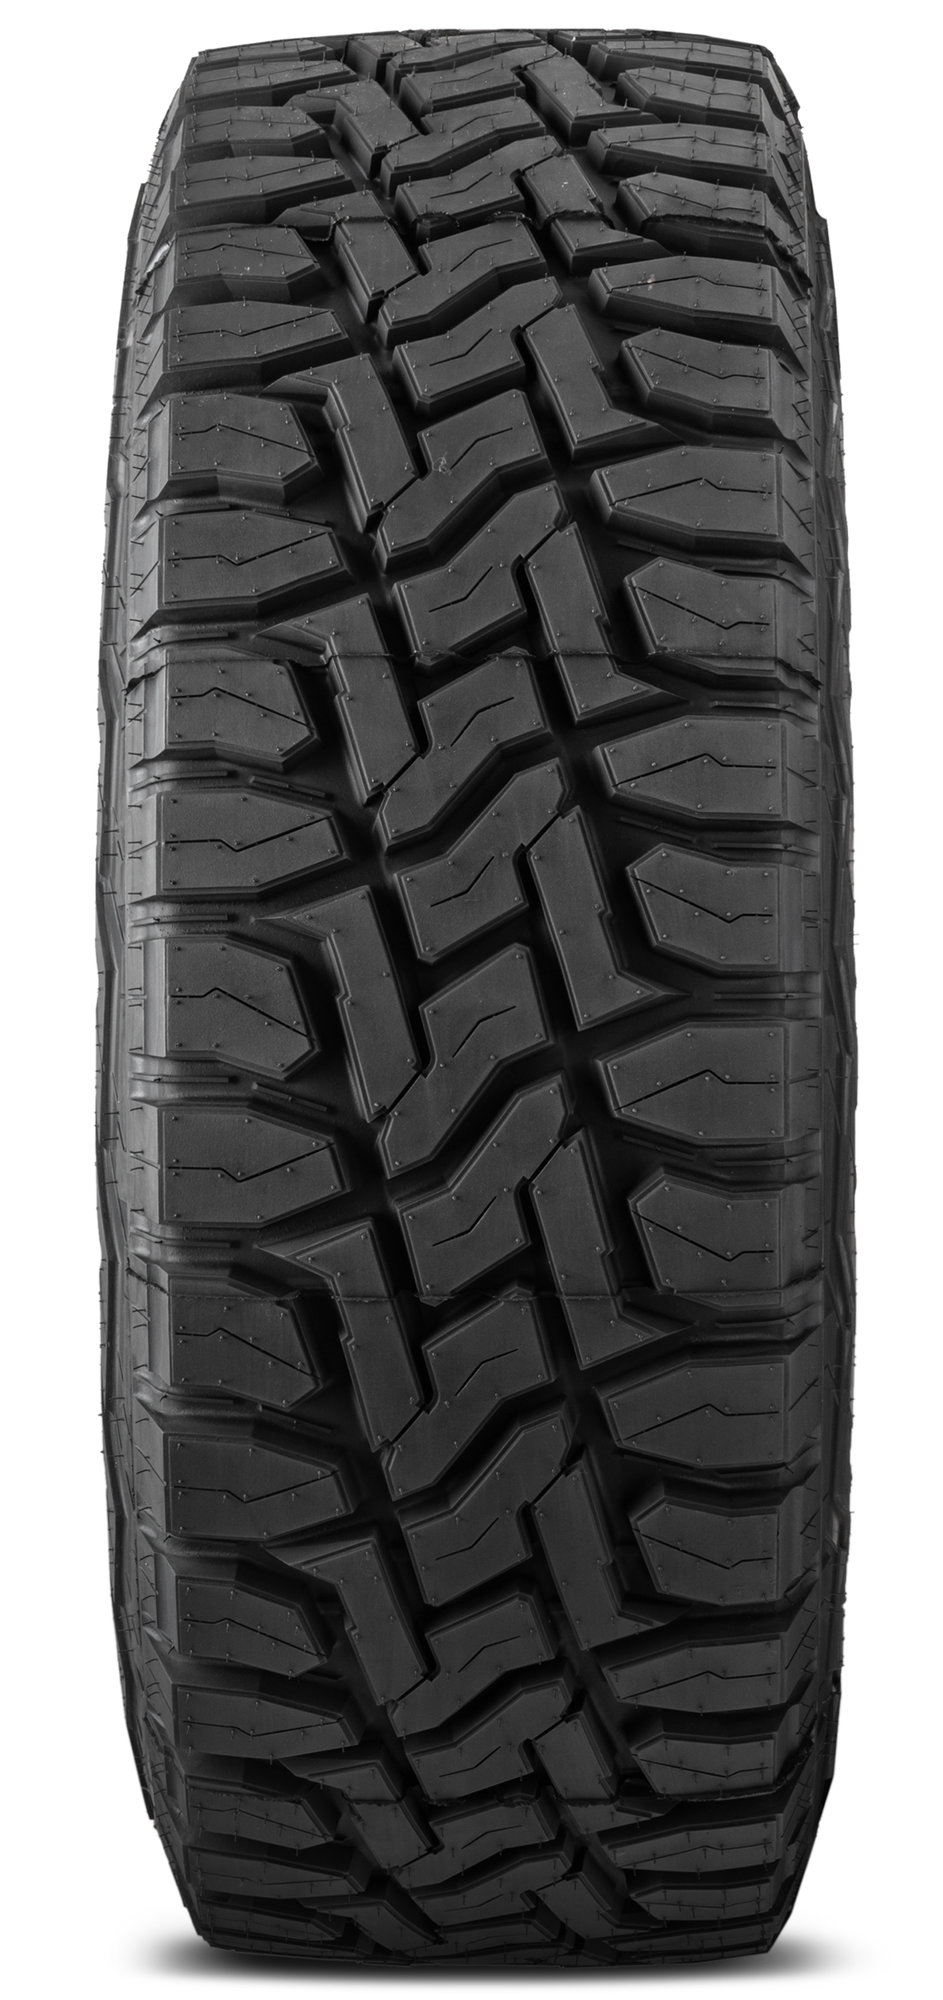 Toyo Open Country R T All Terrain Radial Tire Lt285 75r16 126q